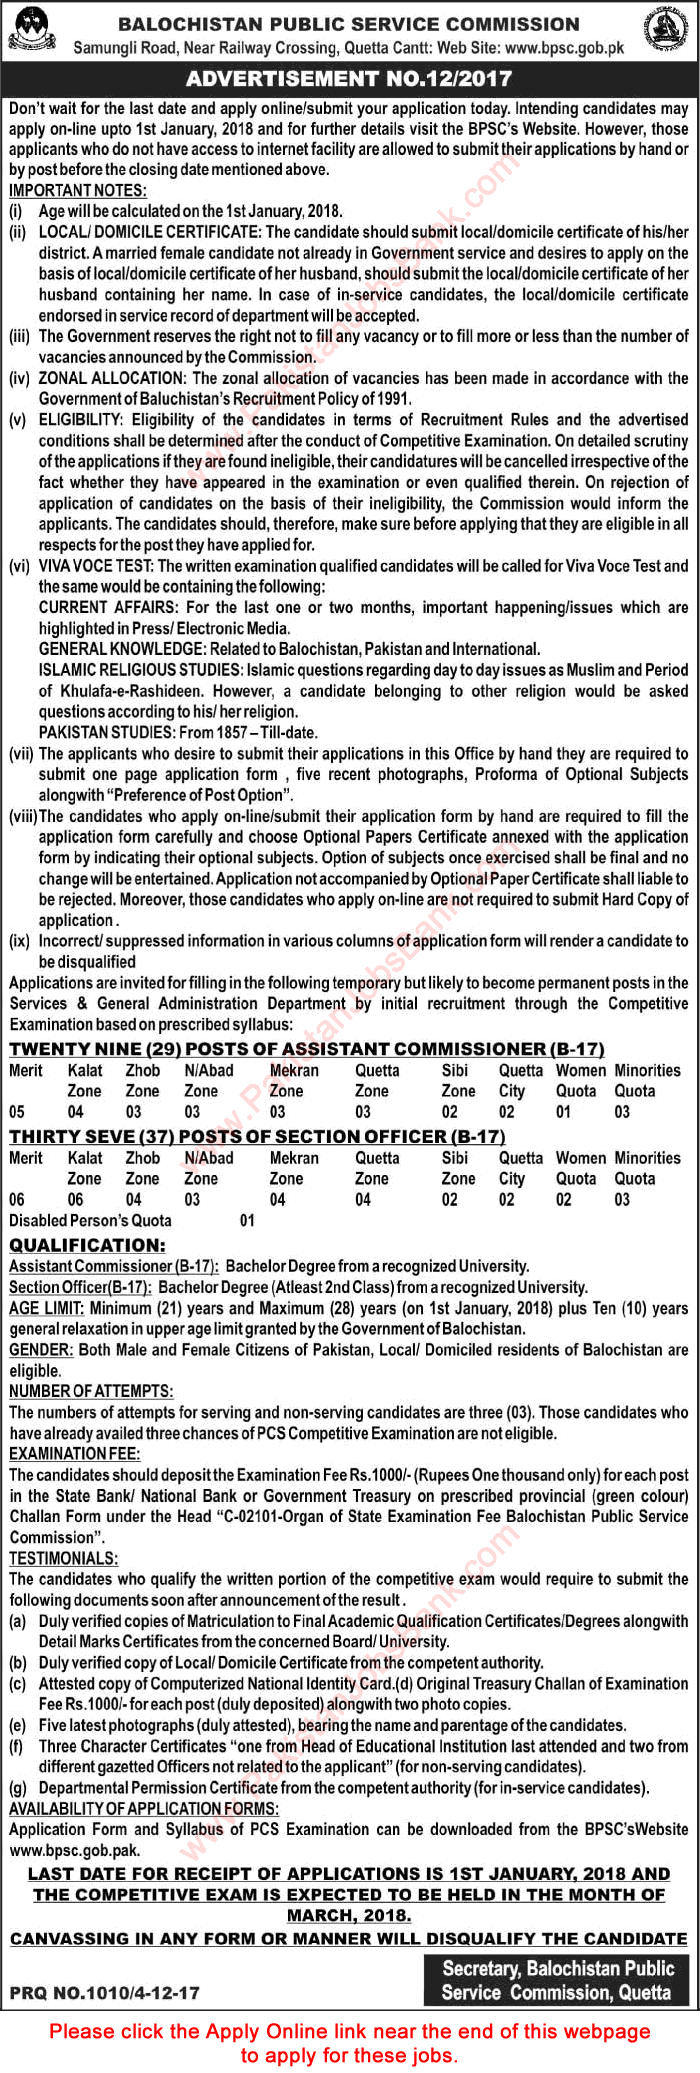 BPSC Jobs December 2017 Apply Online through Competitive Examination Advertisement No 12/2017 Latest